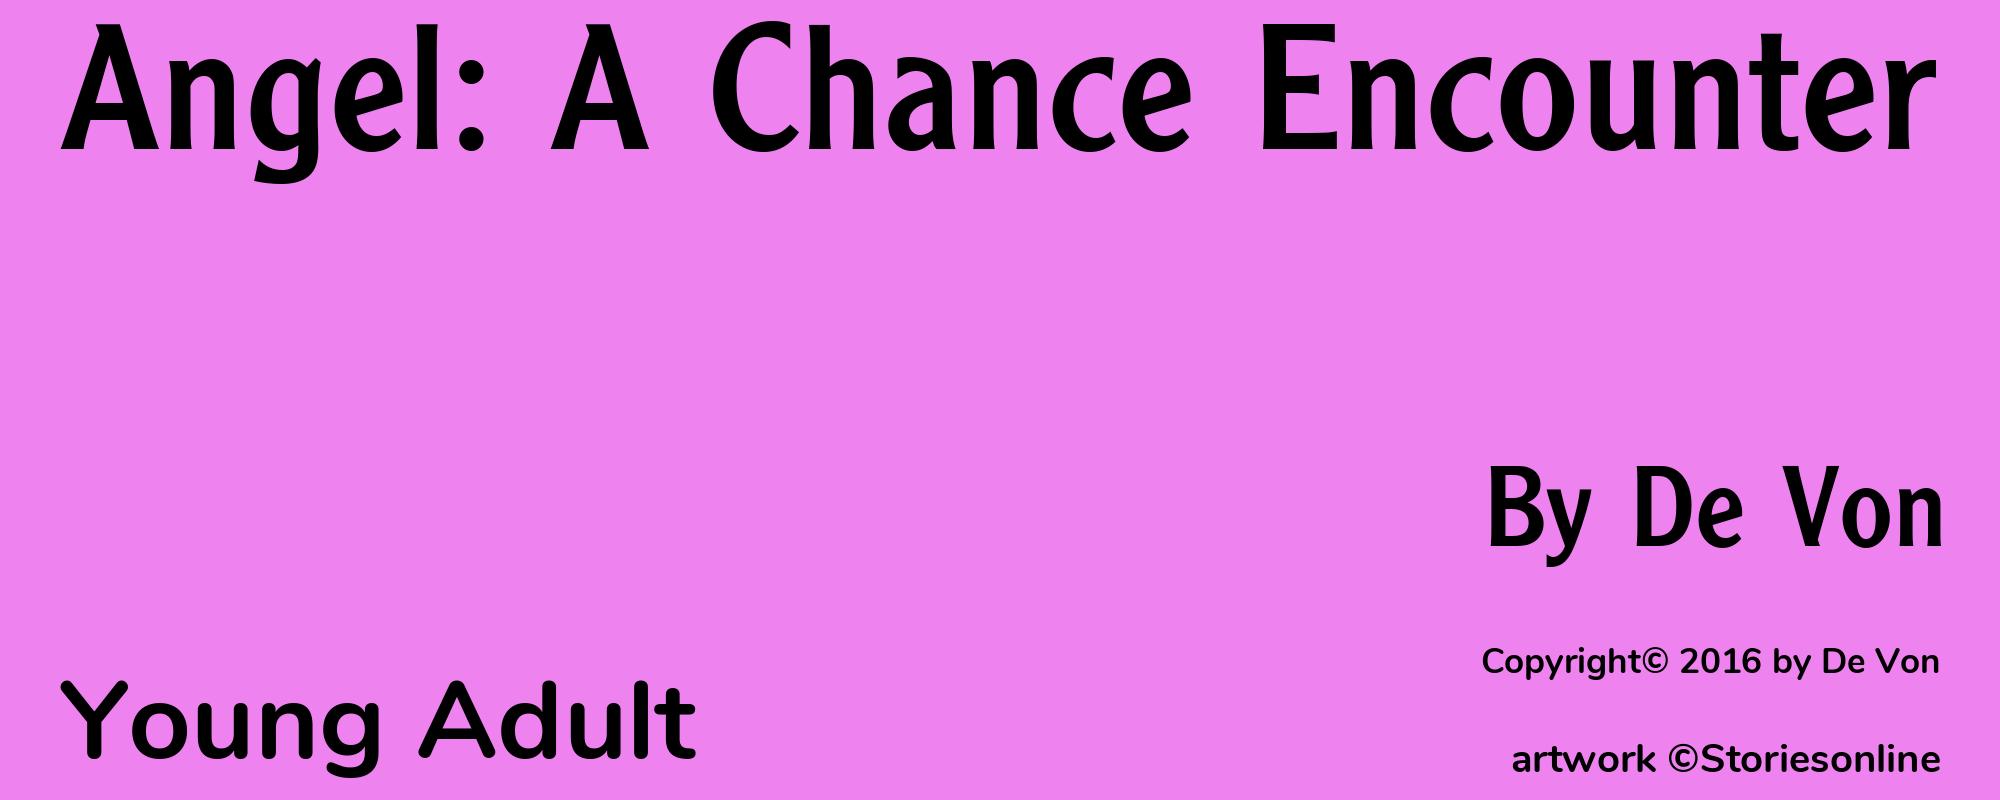 Angel: A Chance Encounter - Cover